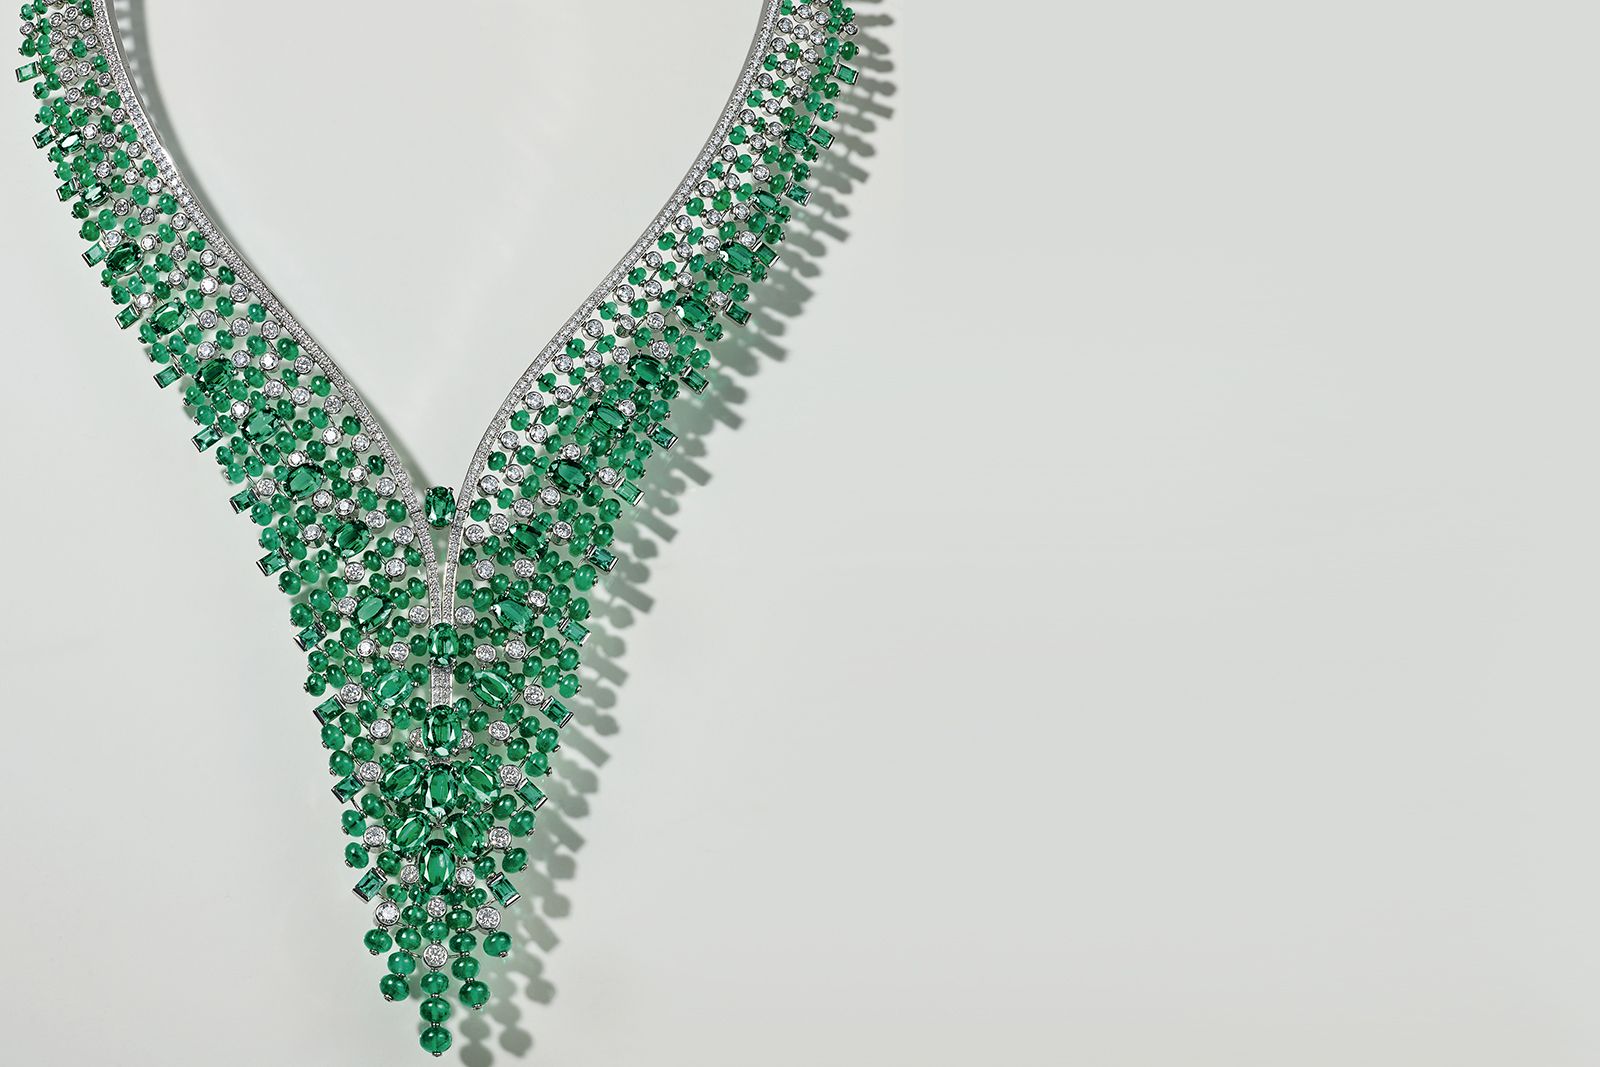  Cartier Alaxoa necklace with faceted, cabochon and beaded emeralds from the Sixième Sens par Cartier High Jewellery Collection